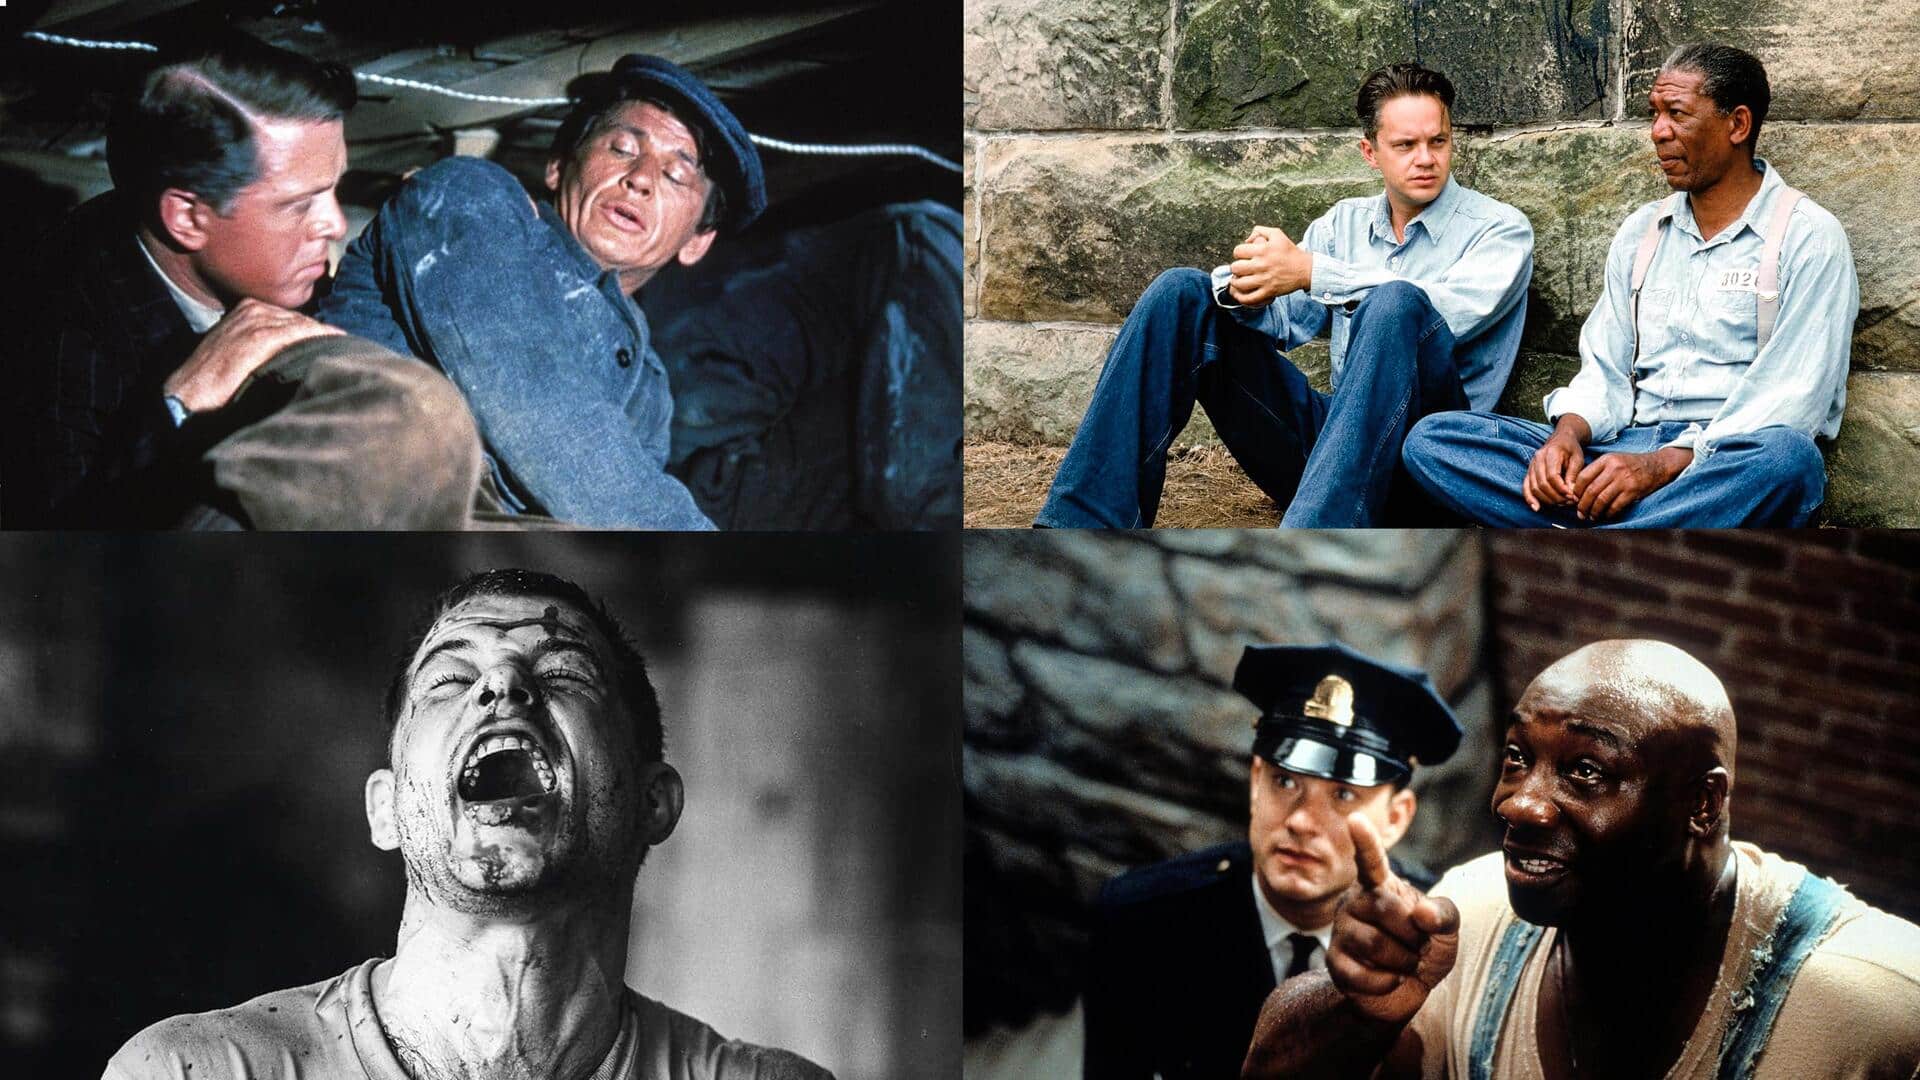 'Shawshank Redemption' to 'Great Escape': Top Hollywood prison movies